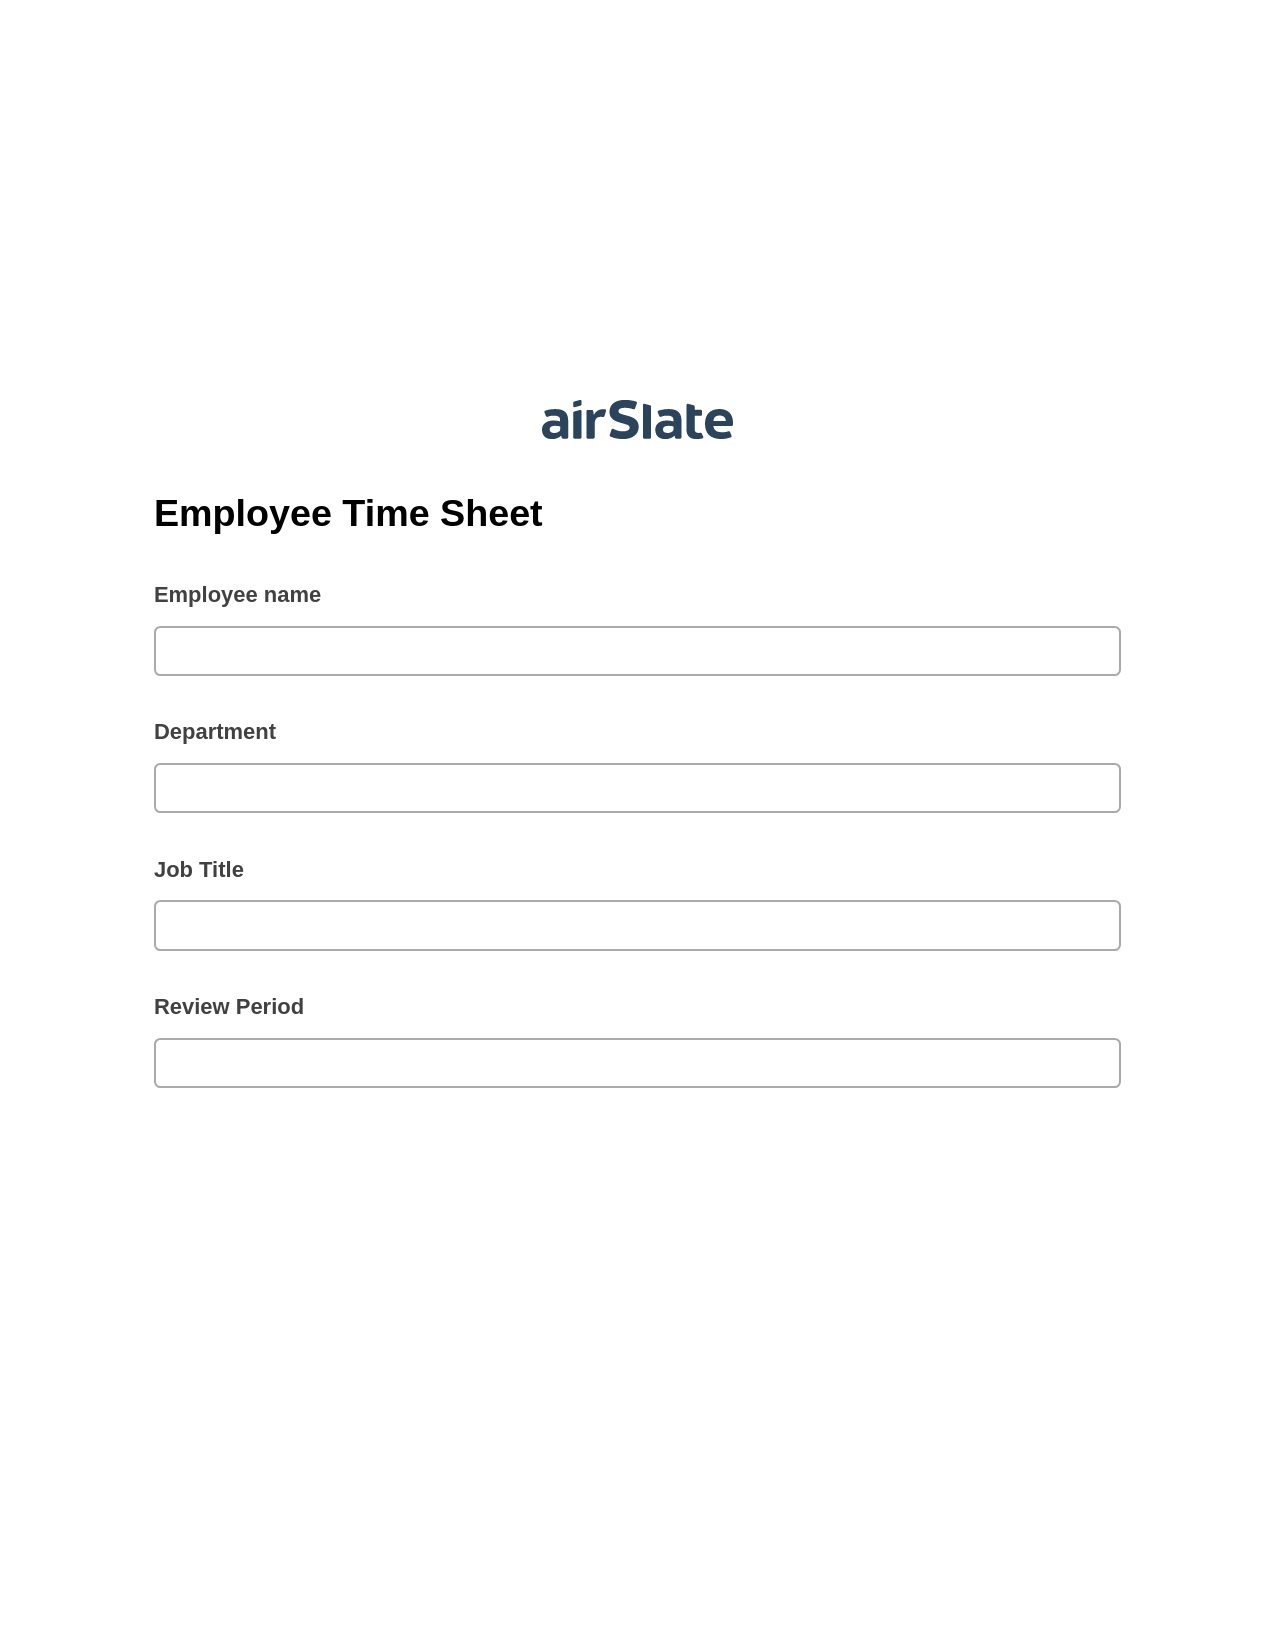 Employee Time Sheet Pre-fill from Office 365 Excel Bot, Unassign Role Bot, Archive to Dropbox Bot